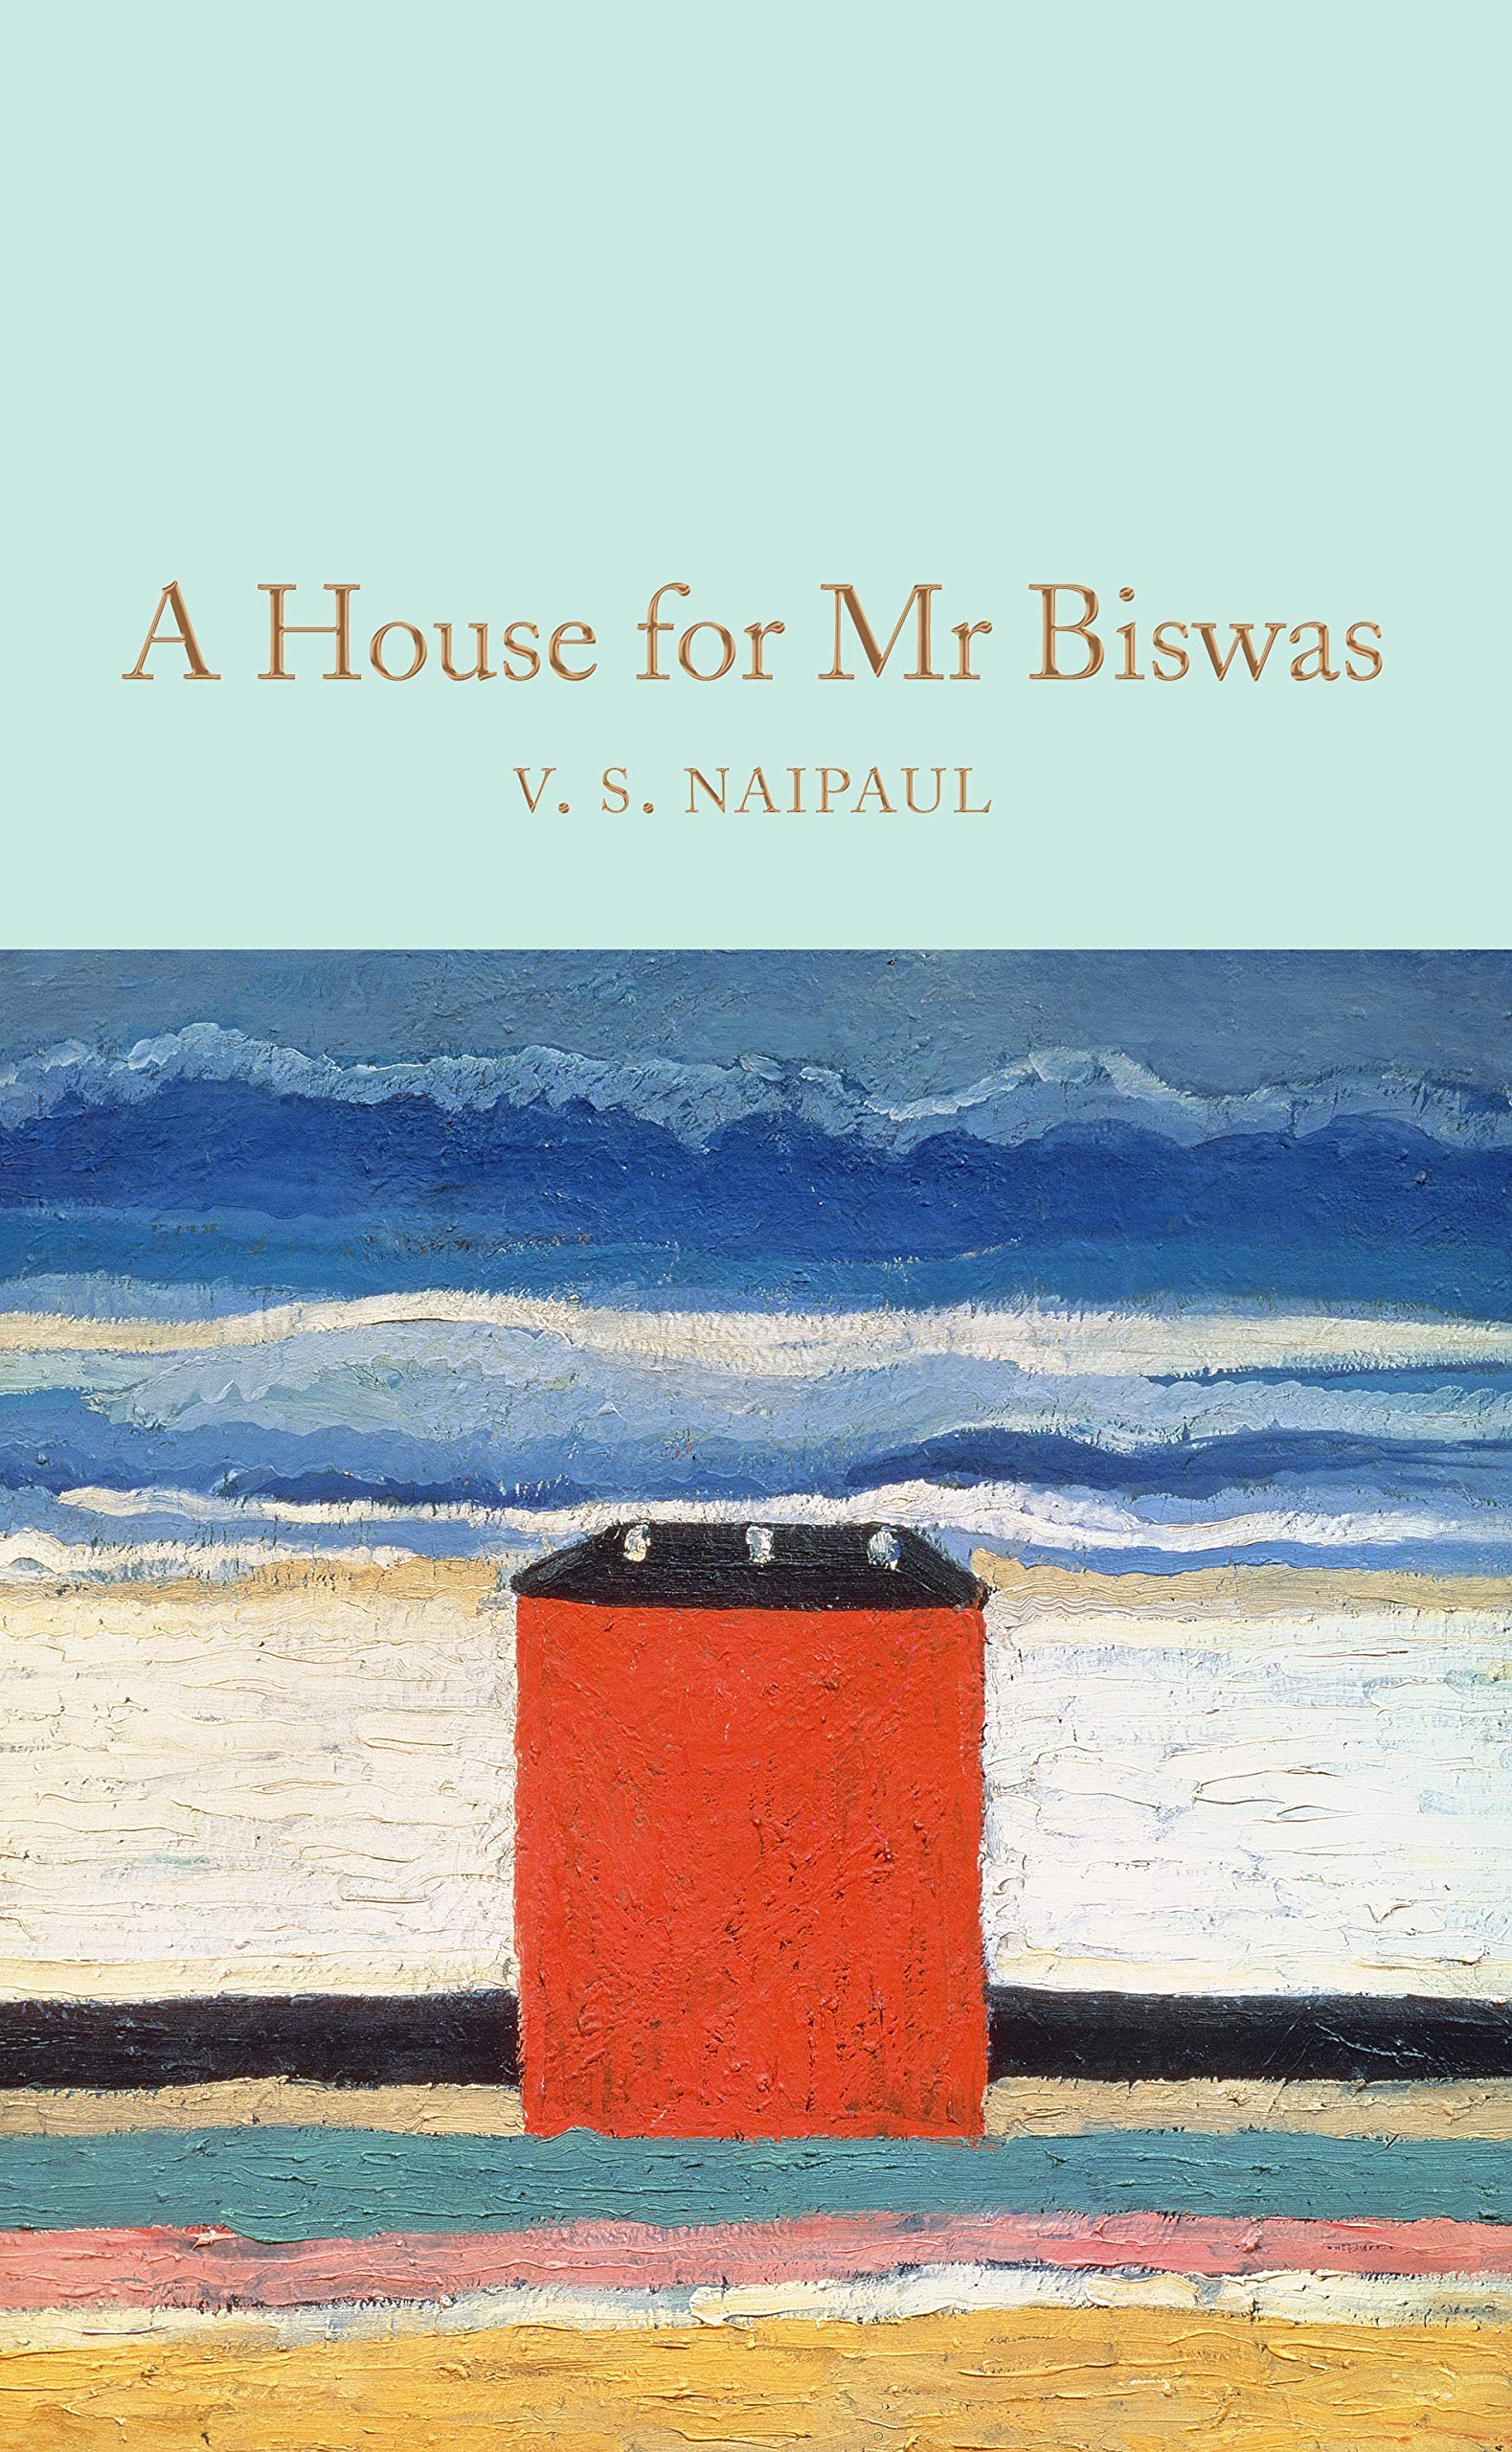 A House for Mr Biswas | V. S. Naipaul image11